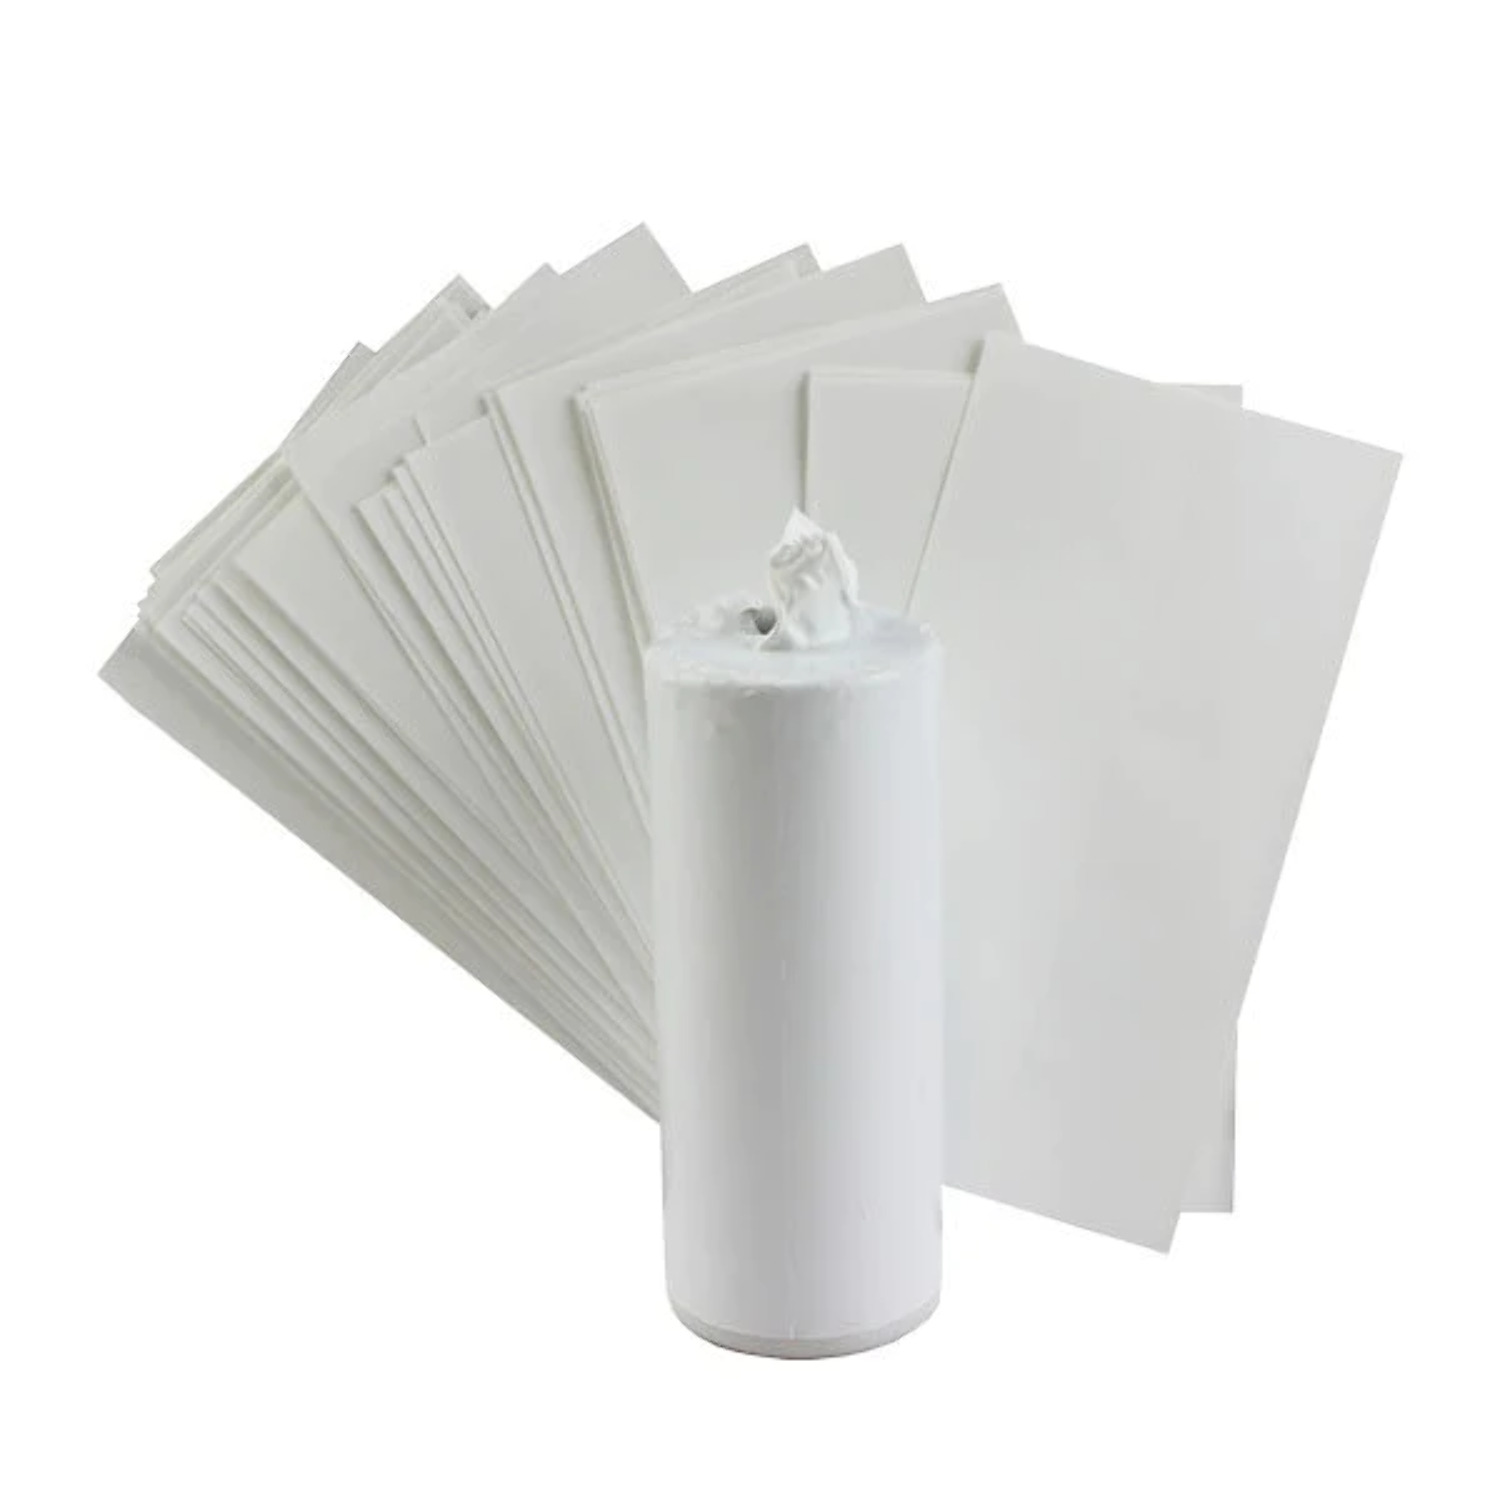 Sublimation Shrink Wrap Film for 12/15/16/20/30oz Tumblers, Perforated for Easy Removal 20 oz.